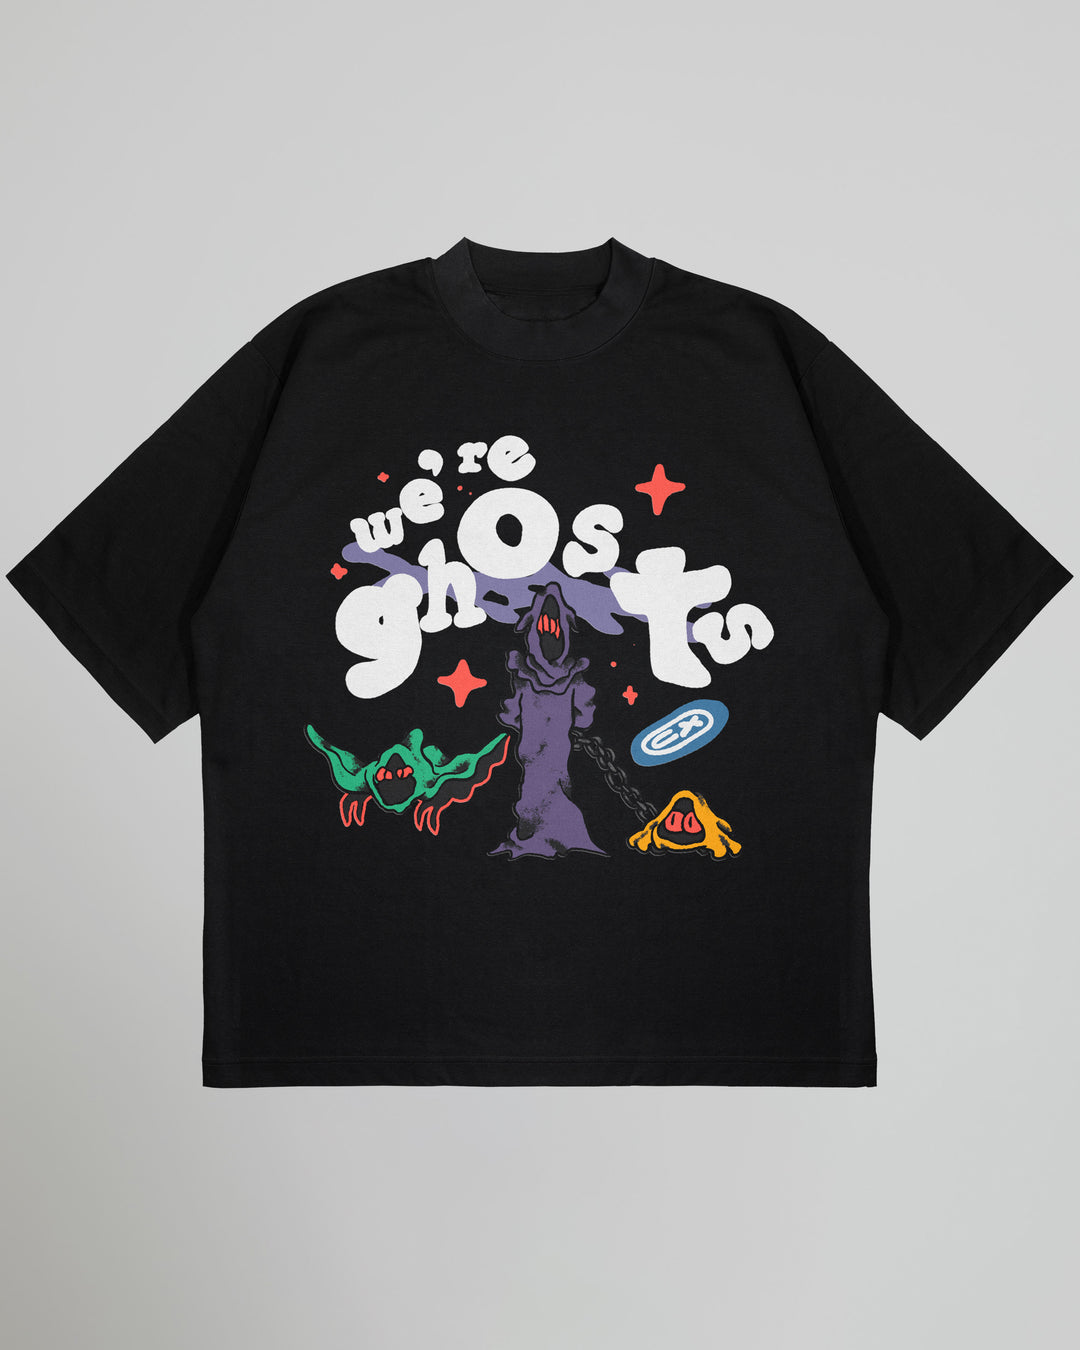 We are Ghosts Tee